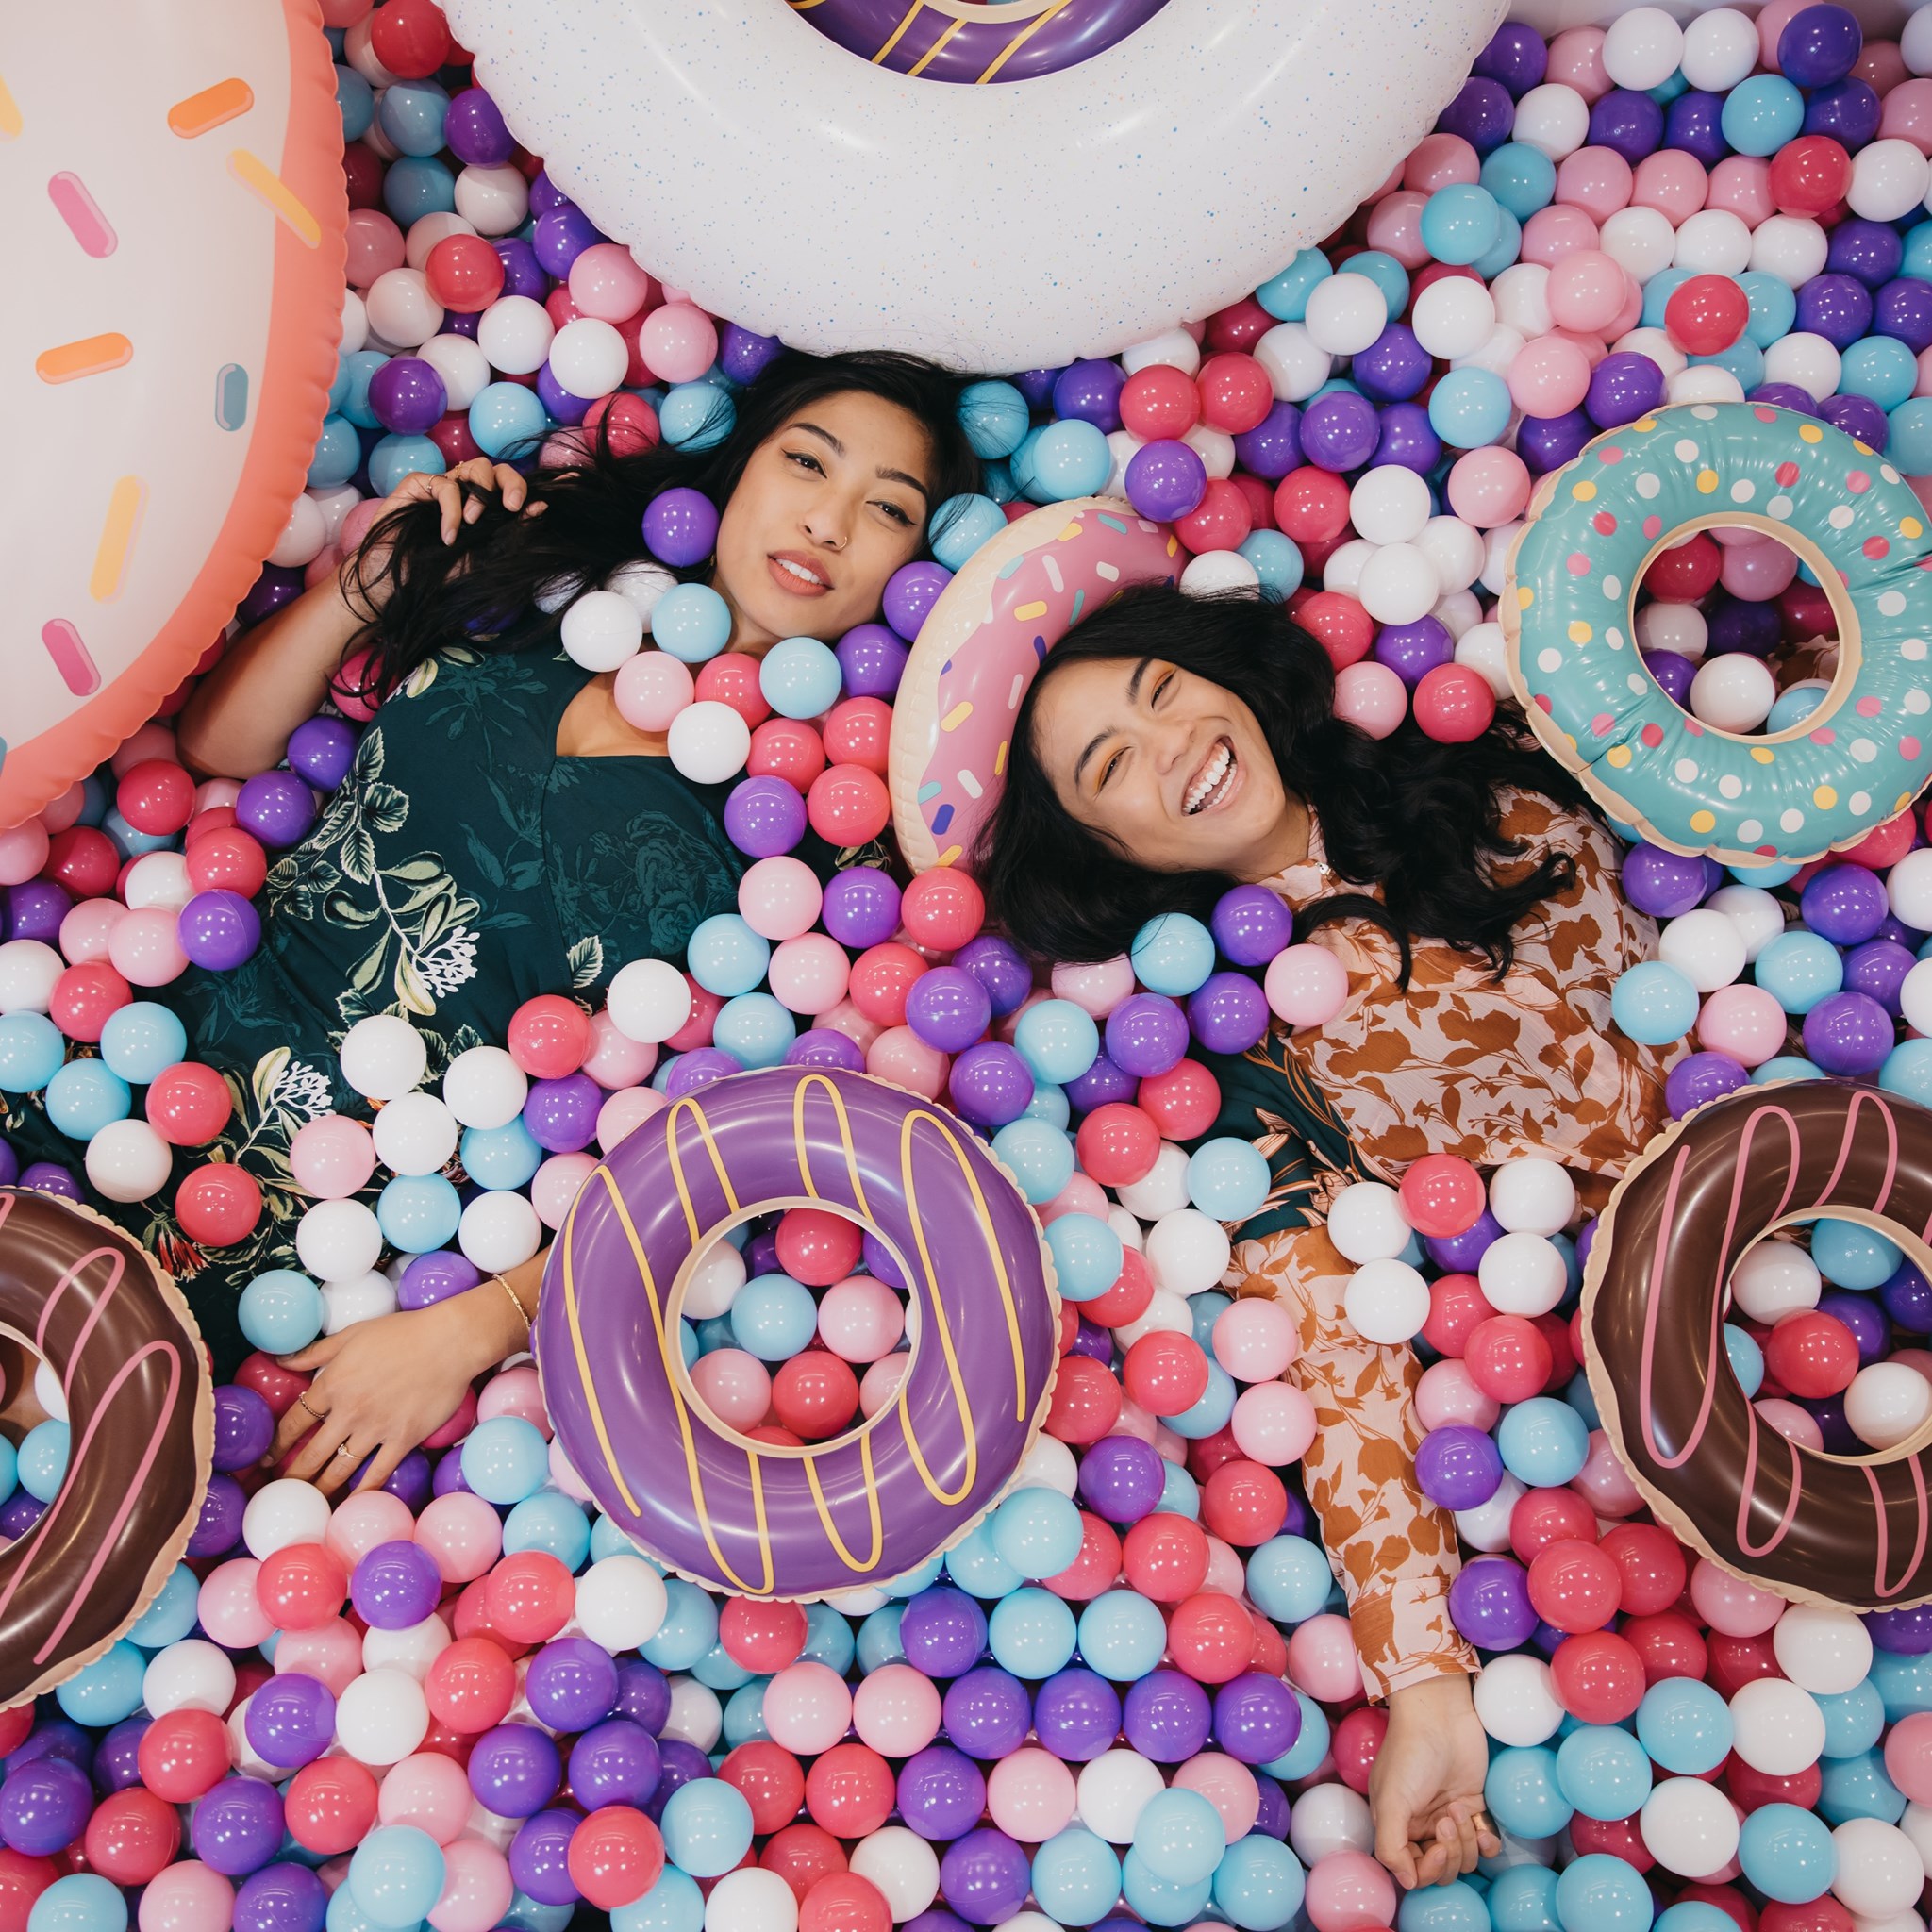 Families-Are-Loving-Orange-County-Events-Such-as-The-Donut-Life-Museum